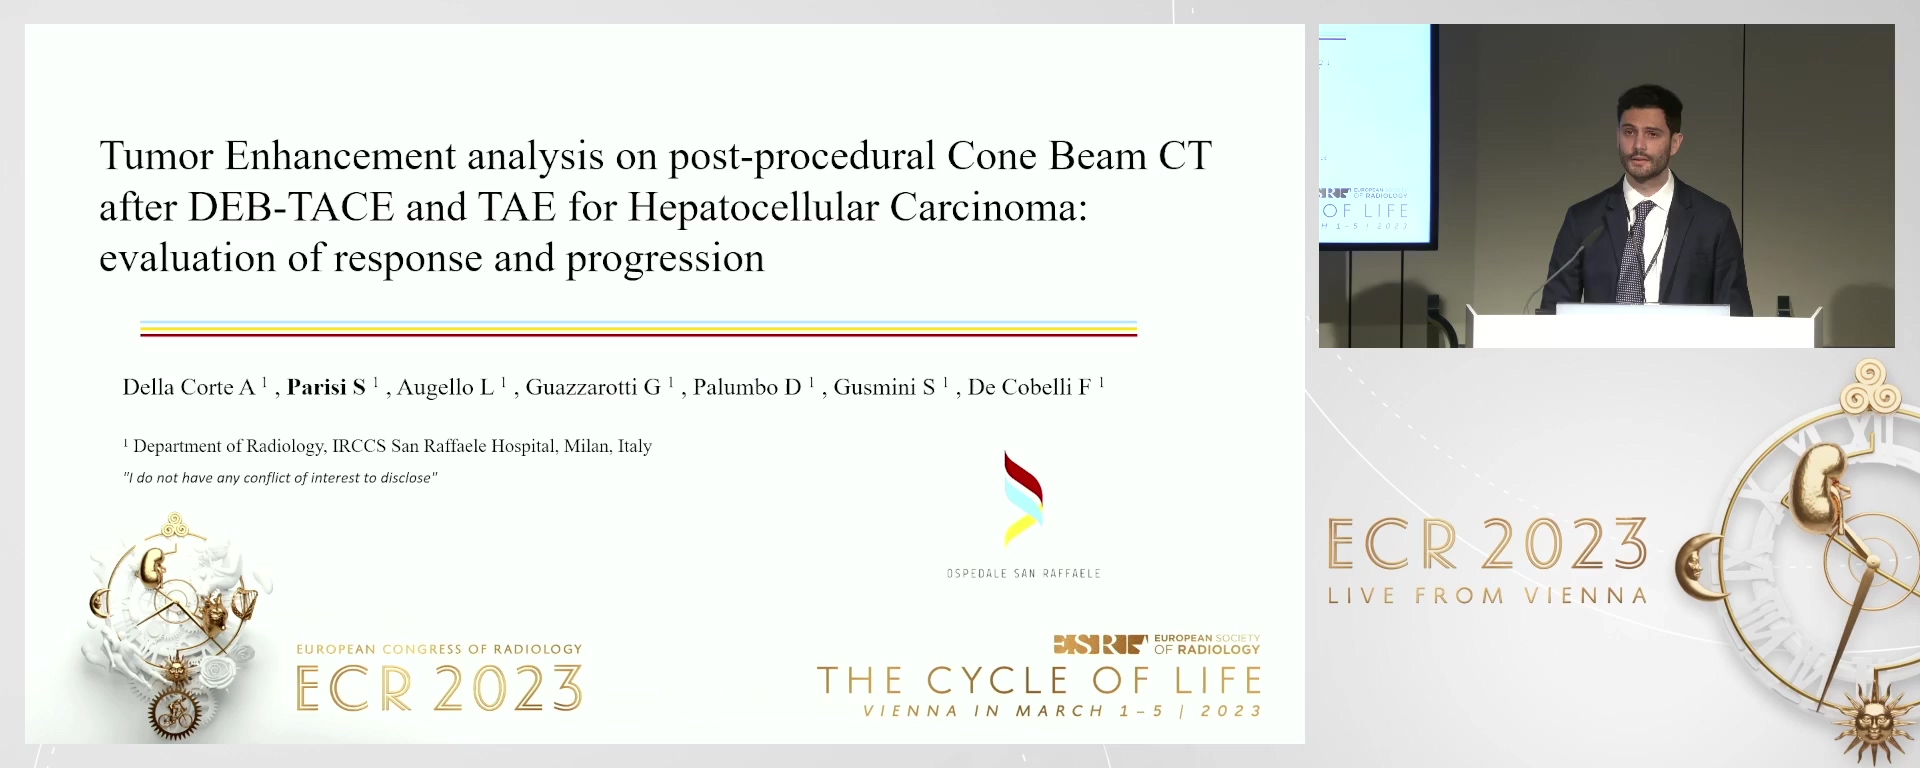 Tumour enhancement analysis on post-procedural Cone Beam CT after DEB-TACE and TAE for hepatocellular carcinoma: evaluation of response and progression